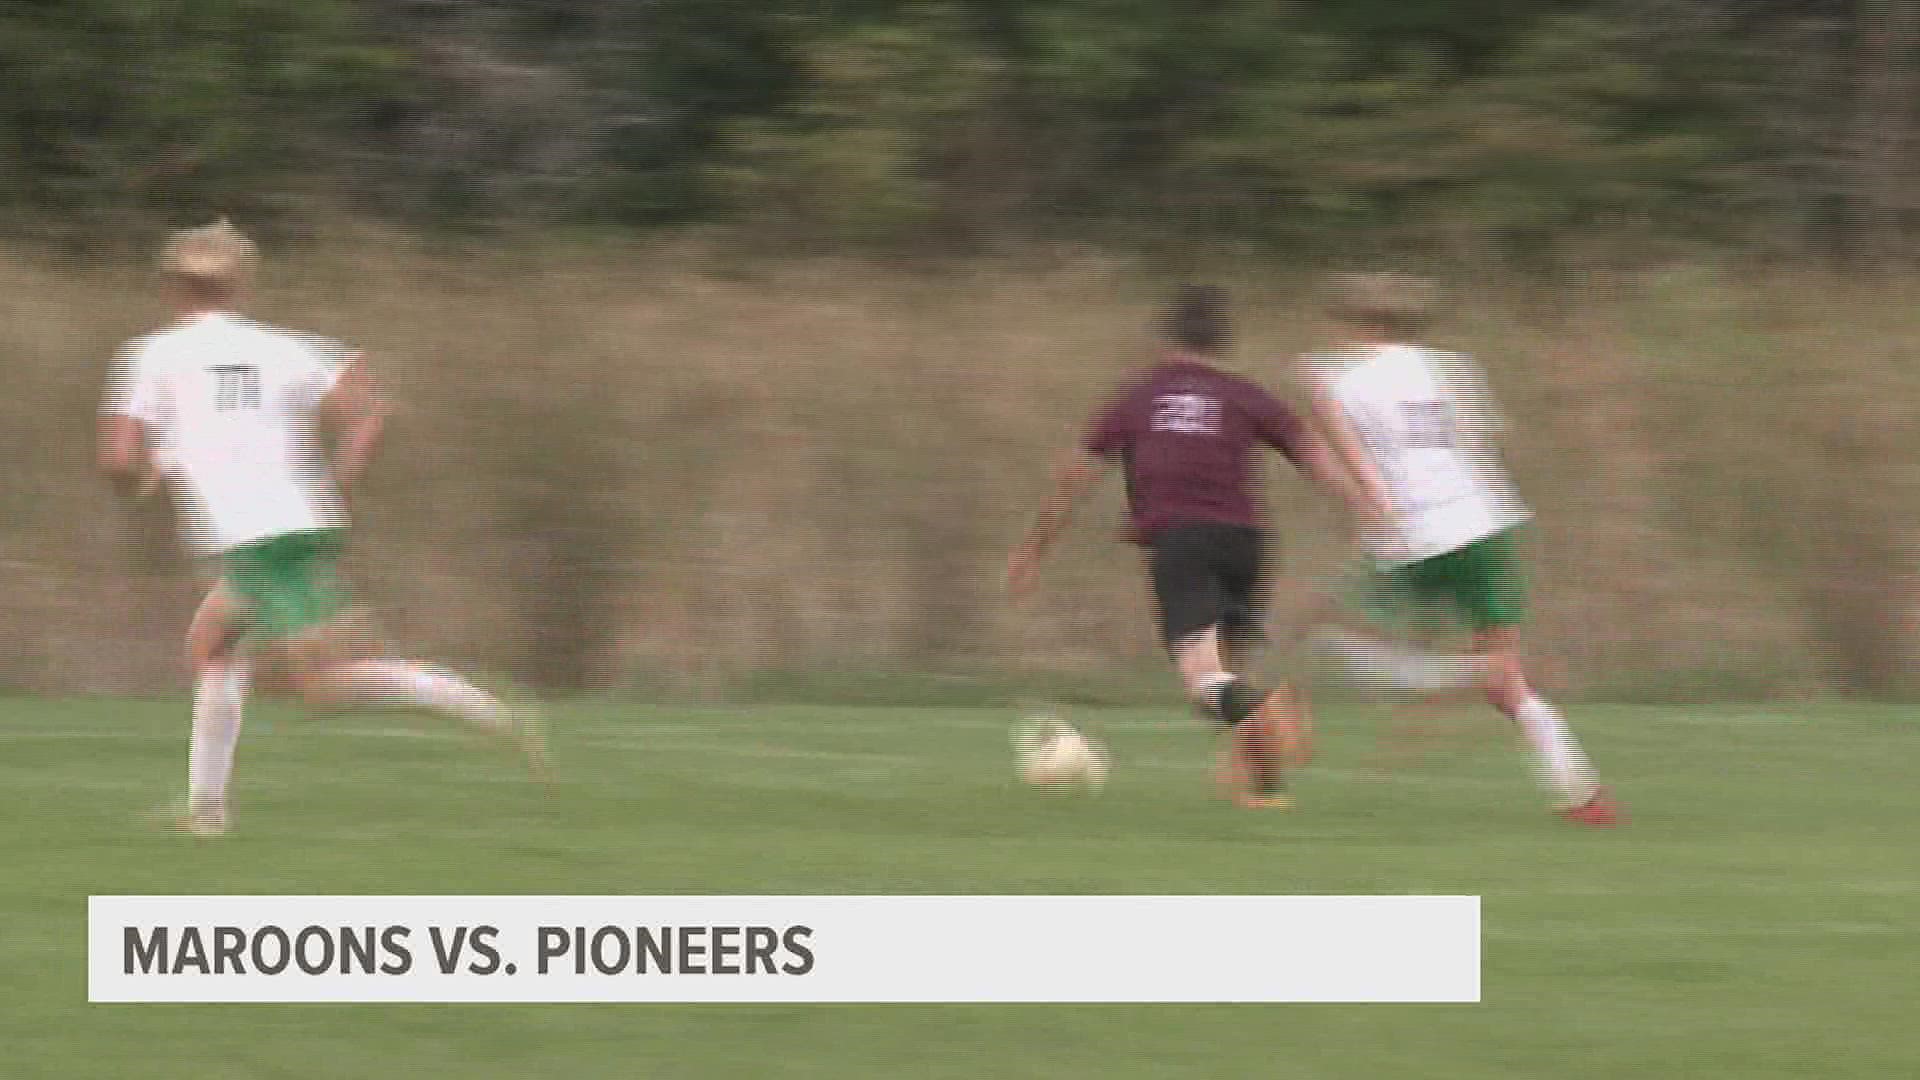 Moline took a 5-0 lead at halftime before scoring another goal to take a commanding win and moving to a 3-1 record.